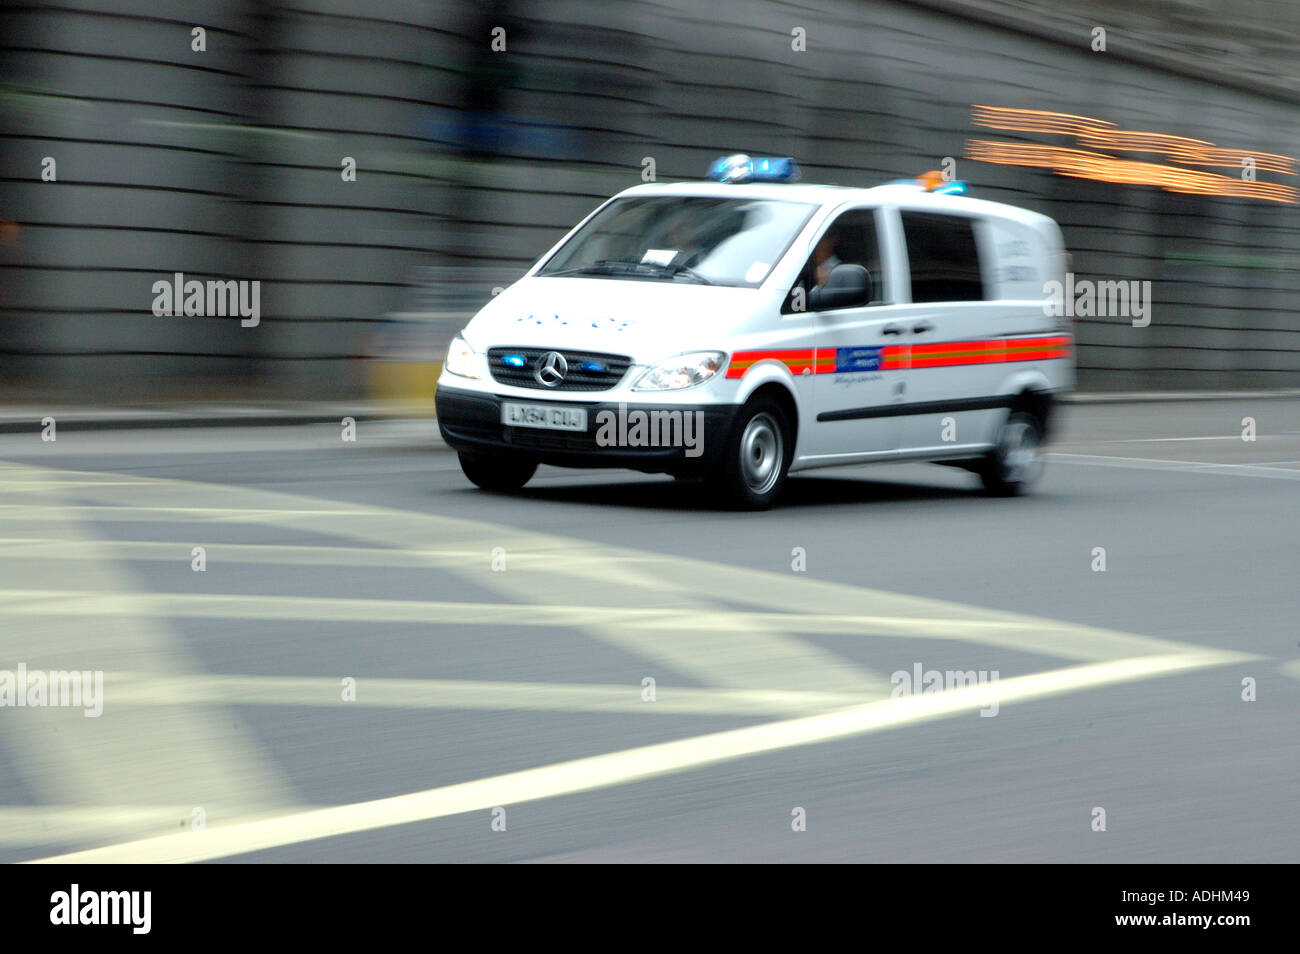 Police Riot Van racing through the streets of london afetr the London bombings Stock Photo